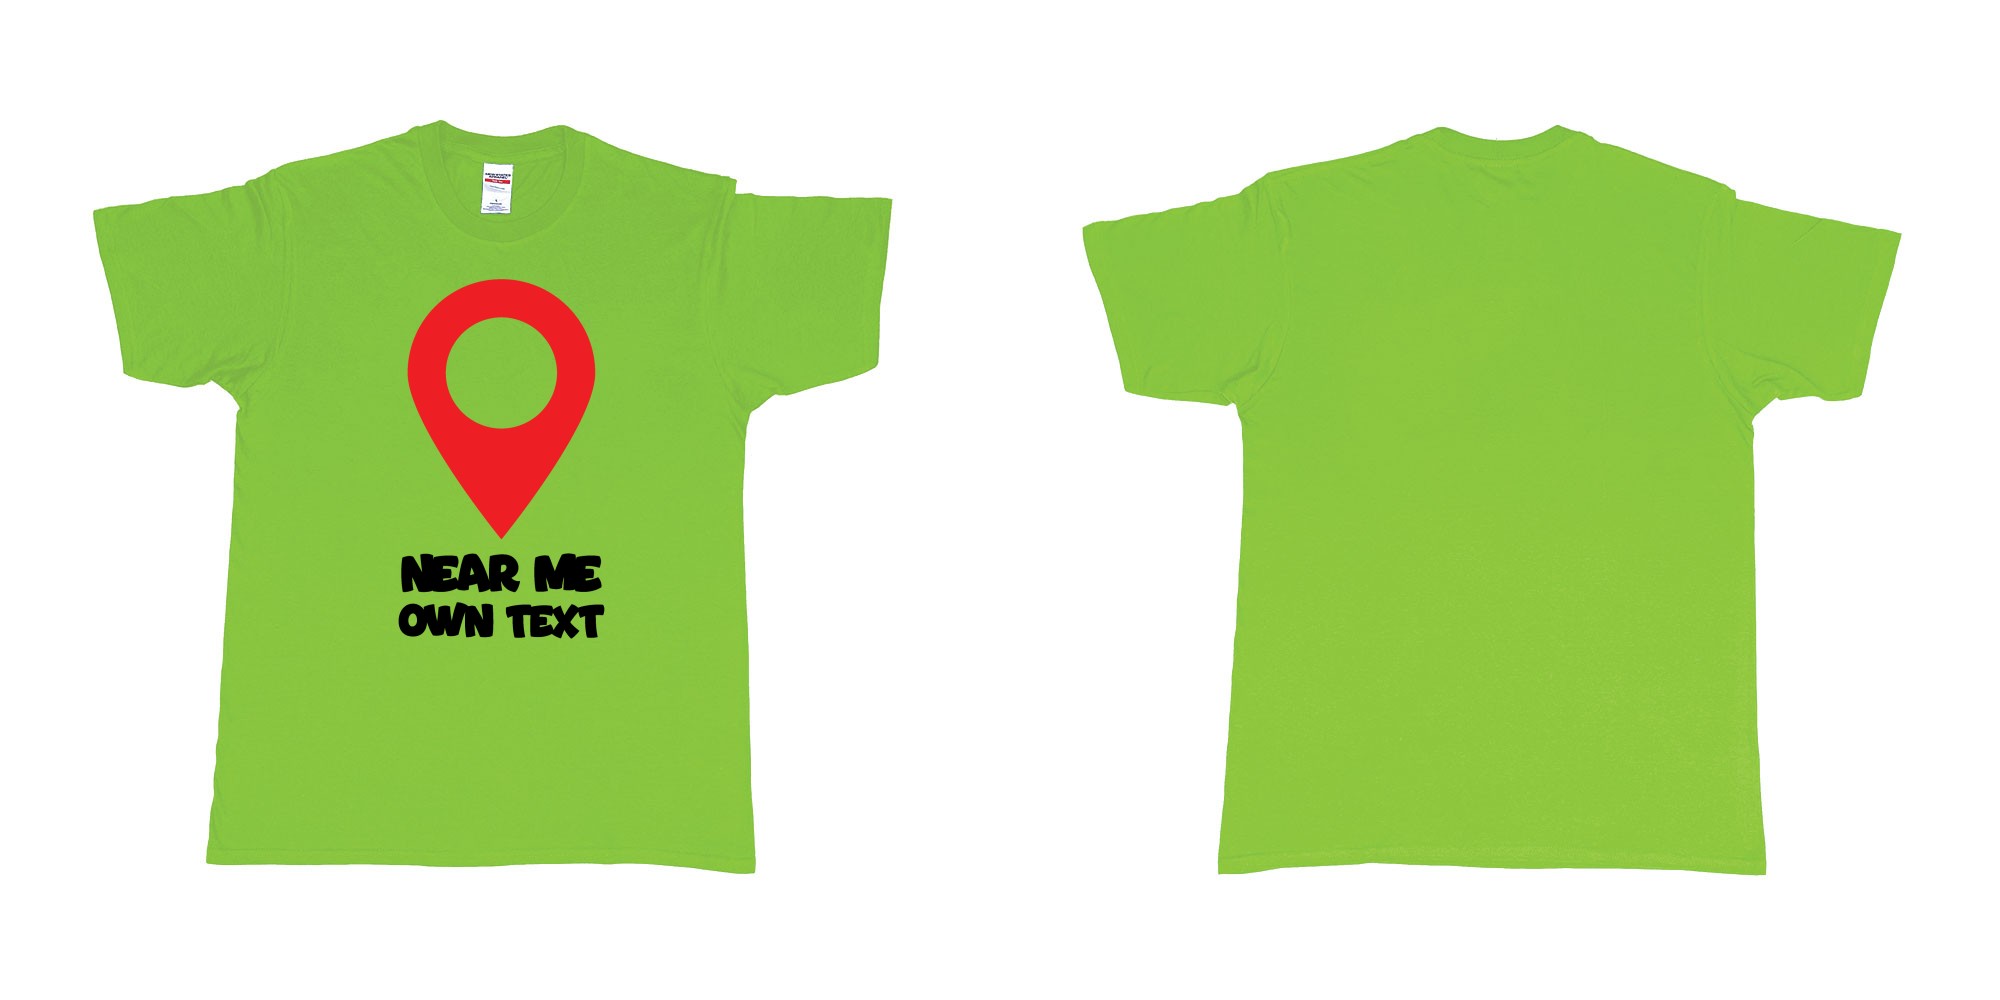 Custom tshirt design tshirt printing near me bali in fabric color lime choice your own text made in Bali by The Pirate Way